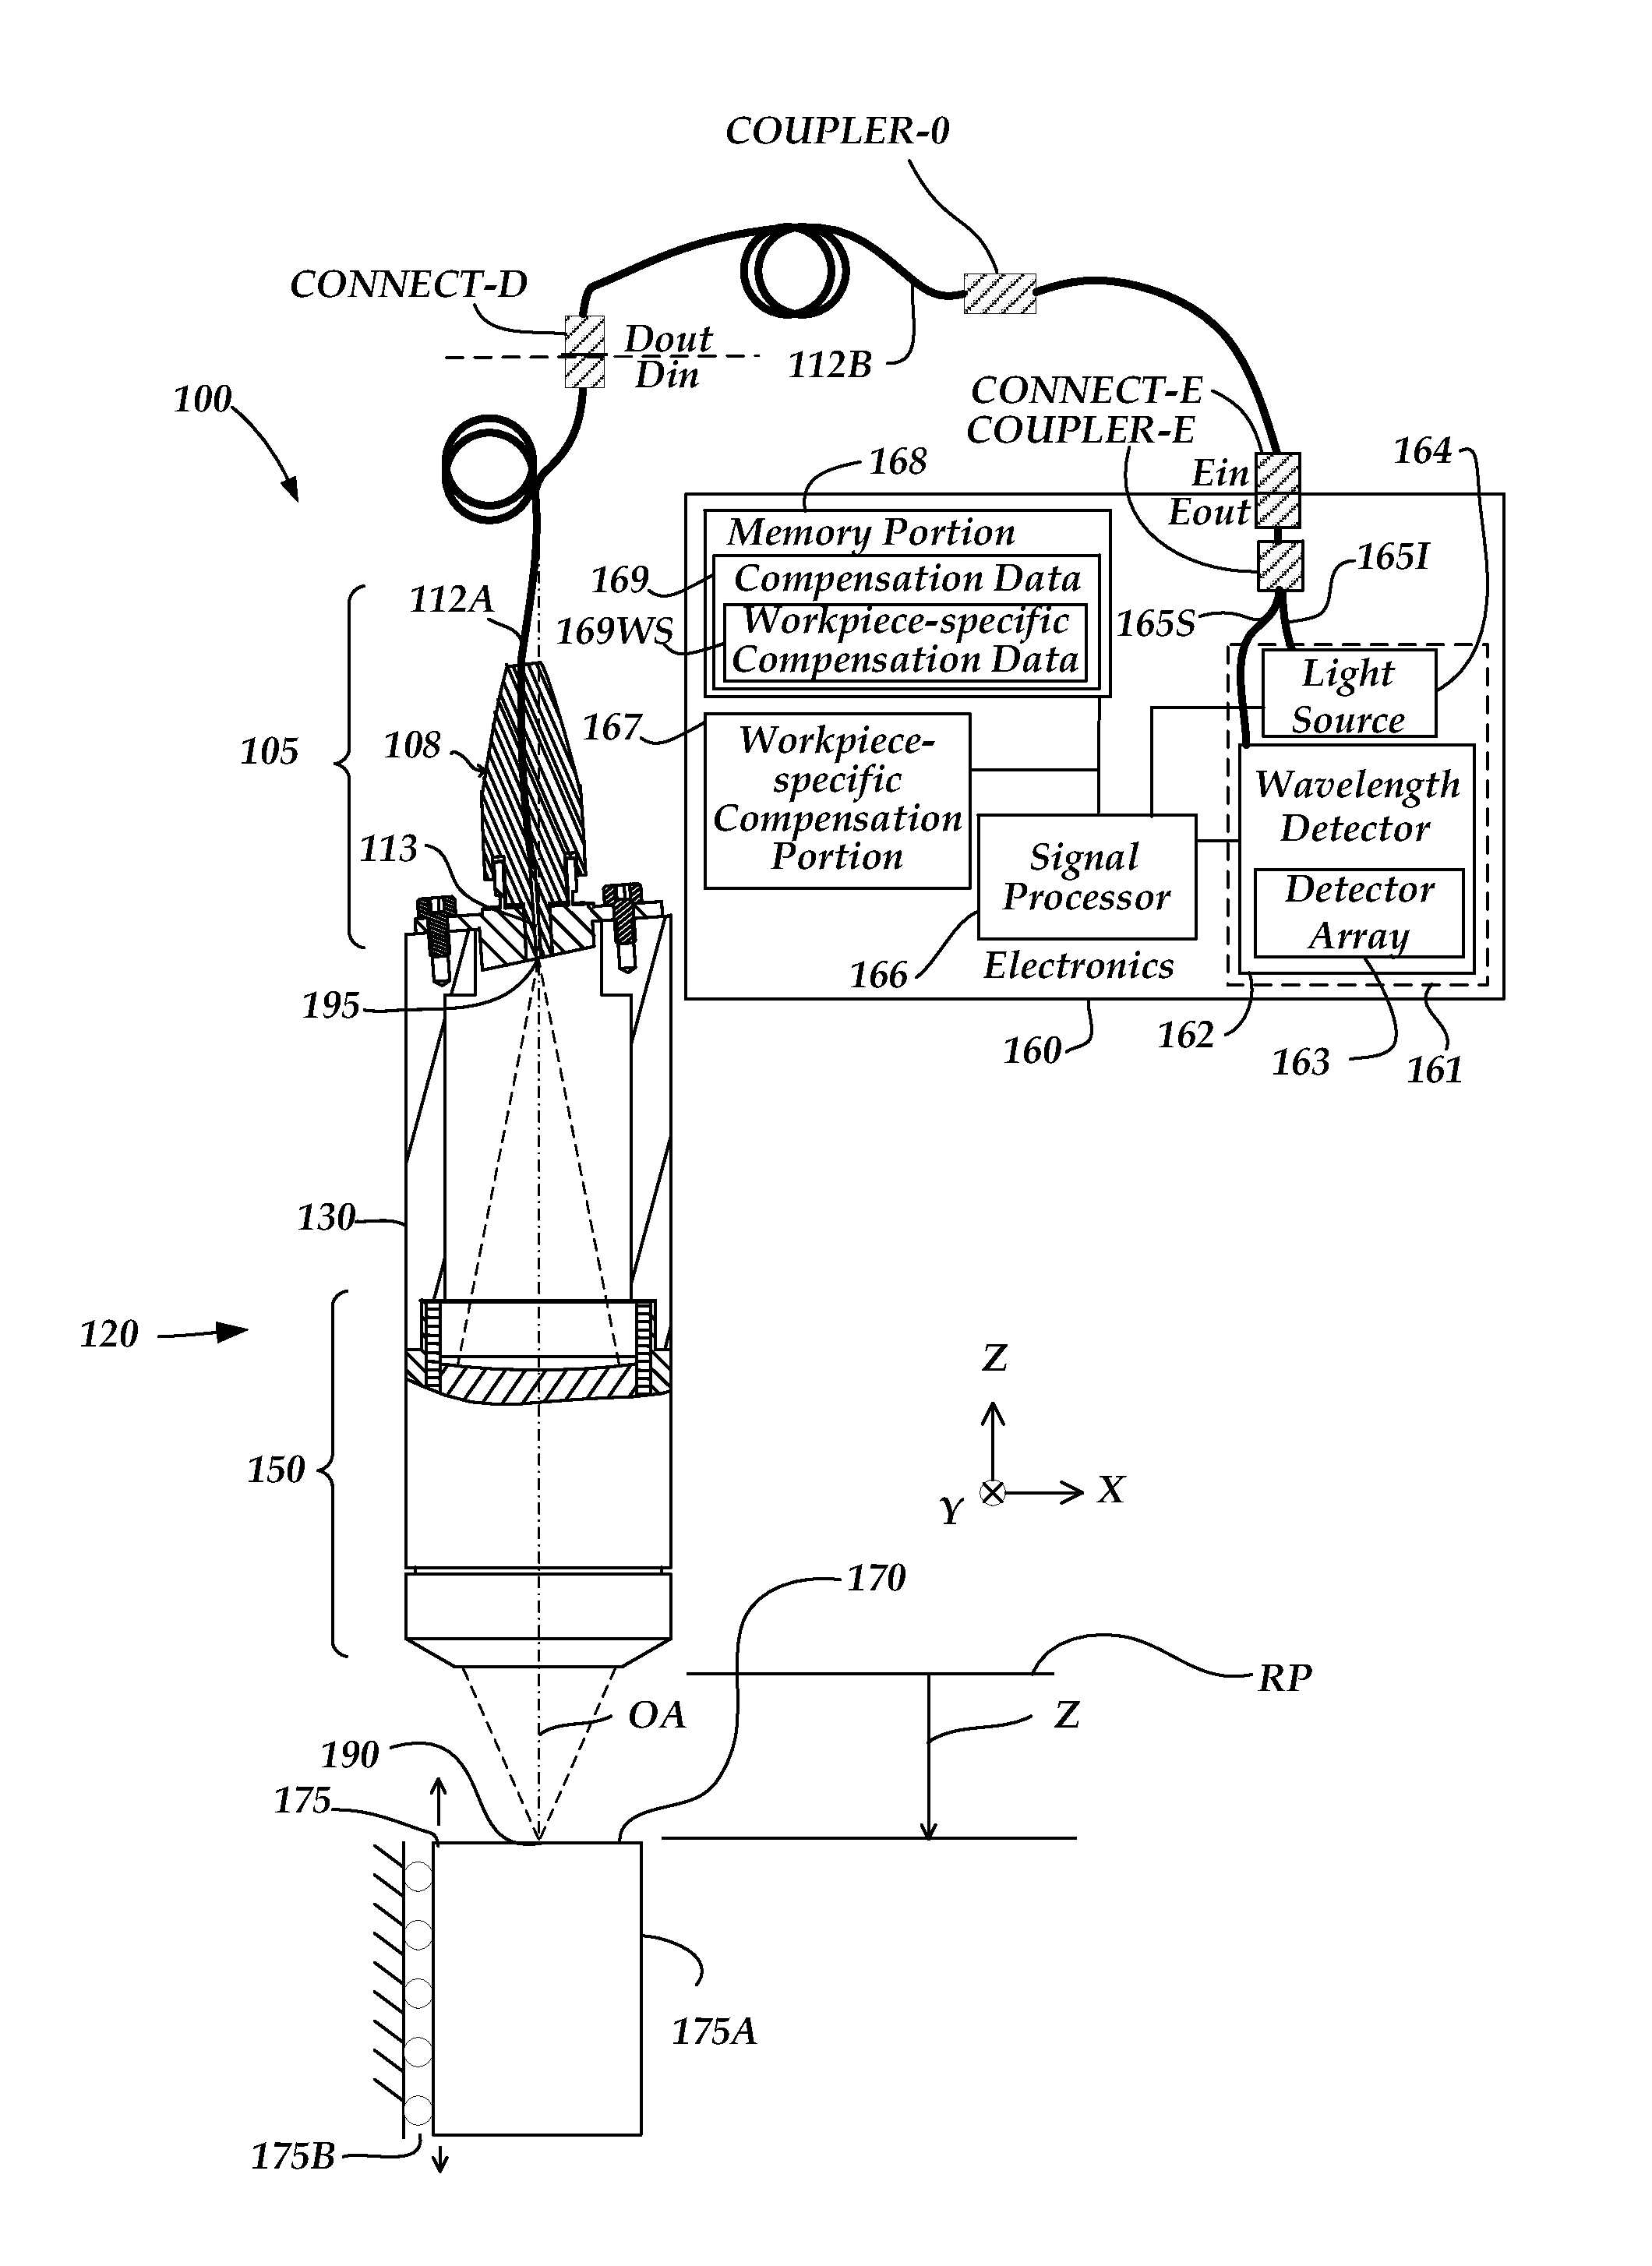 Chromatic point sensor compensation including workpiece material effects